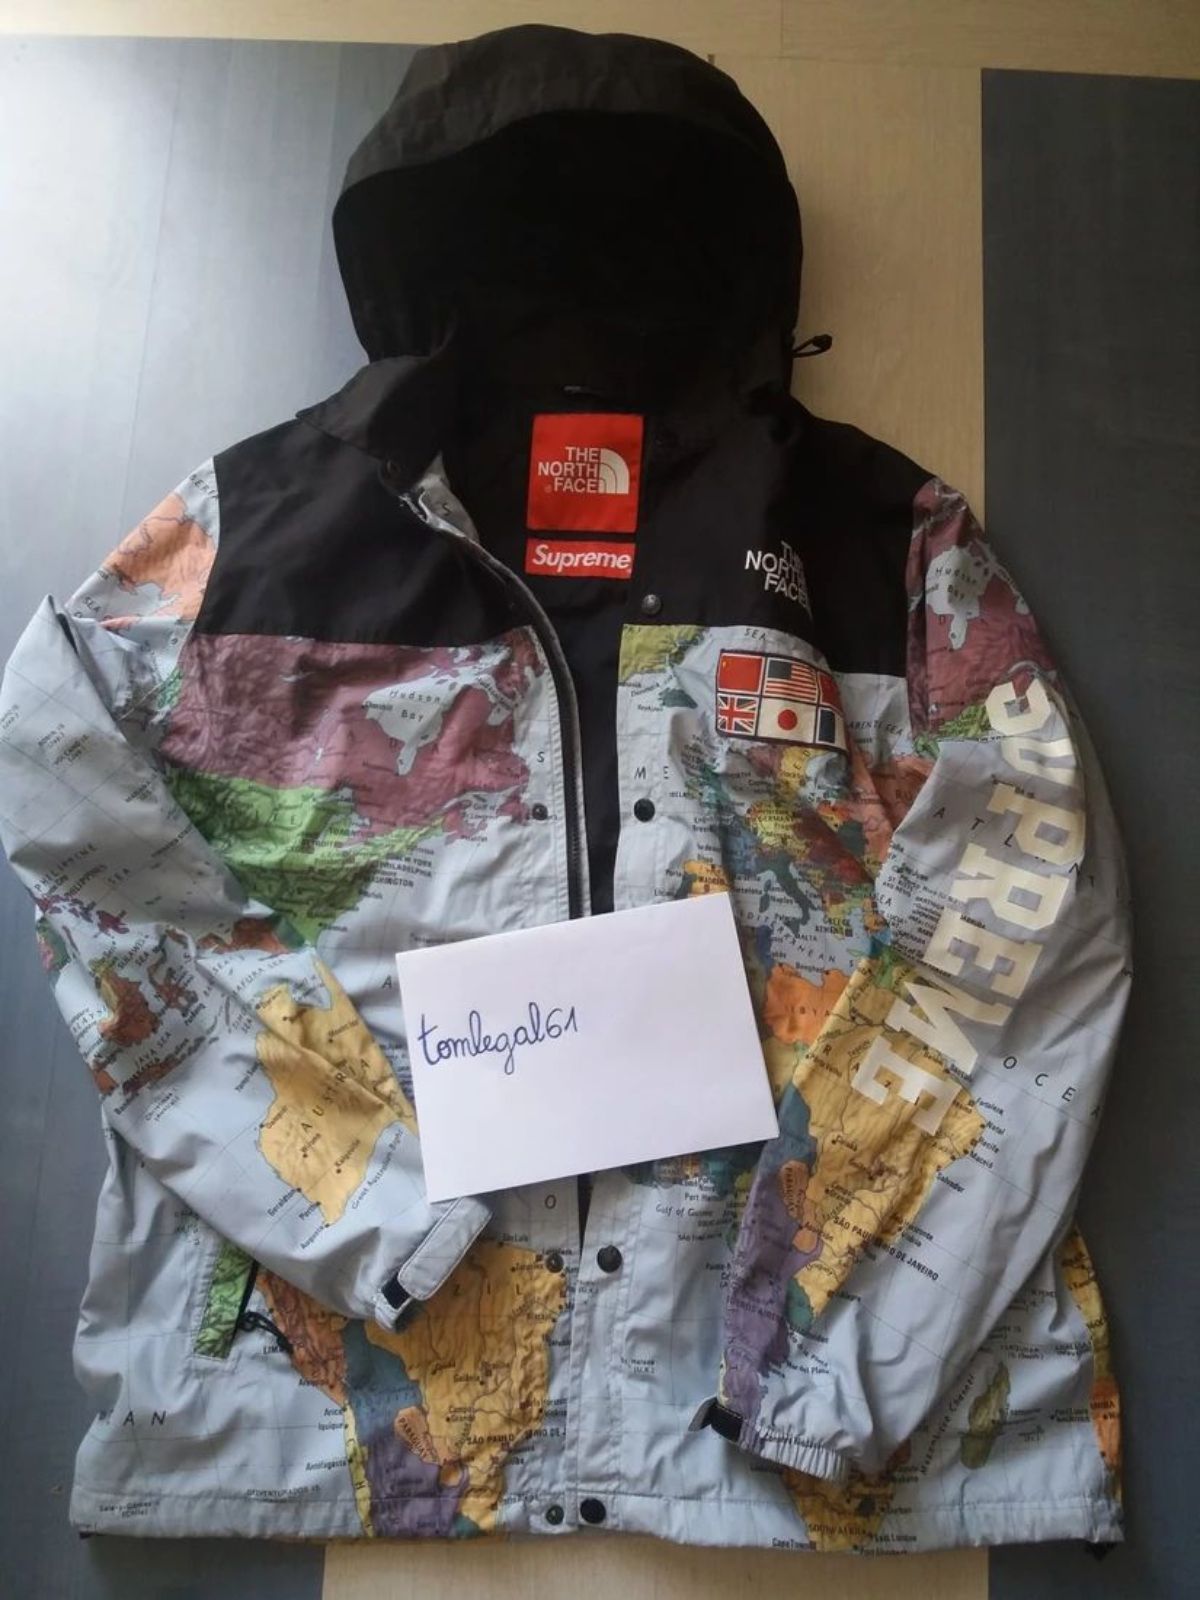 Supreme Supreme x The North face Jacket Expedition Atlas Maps 